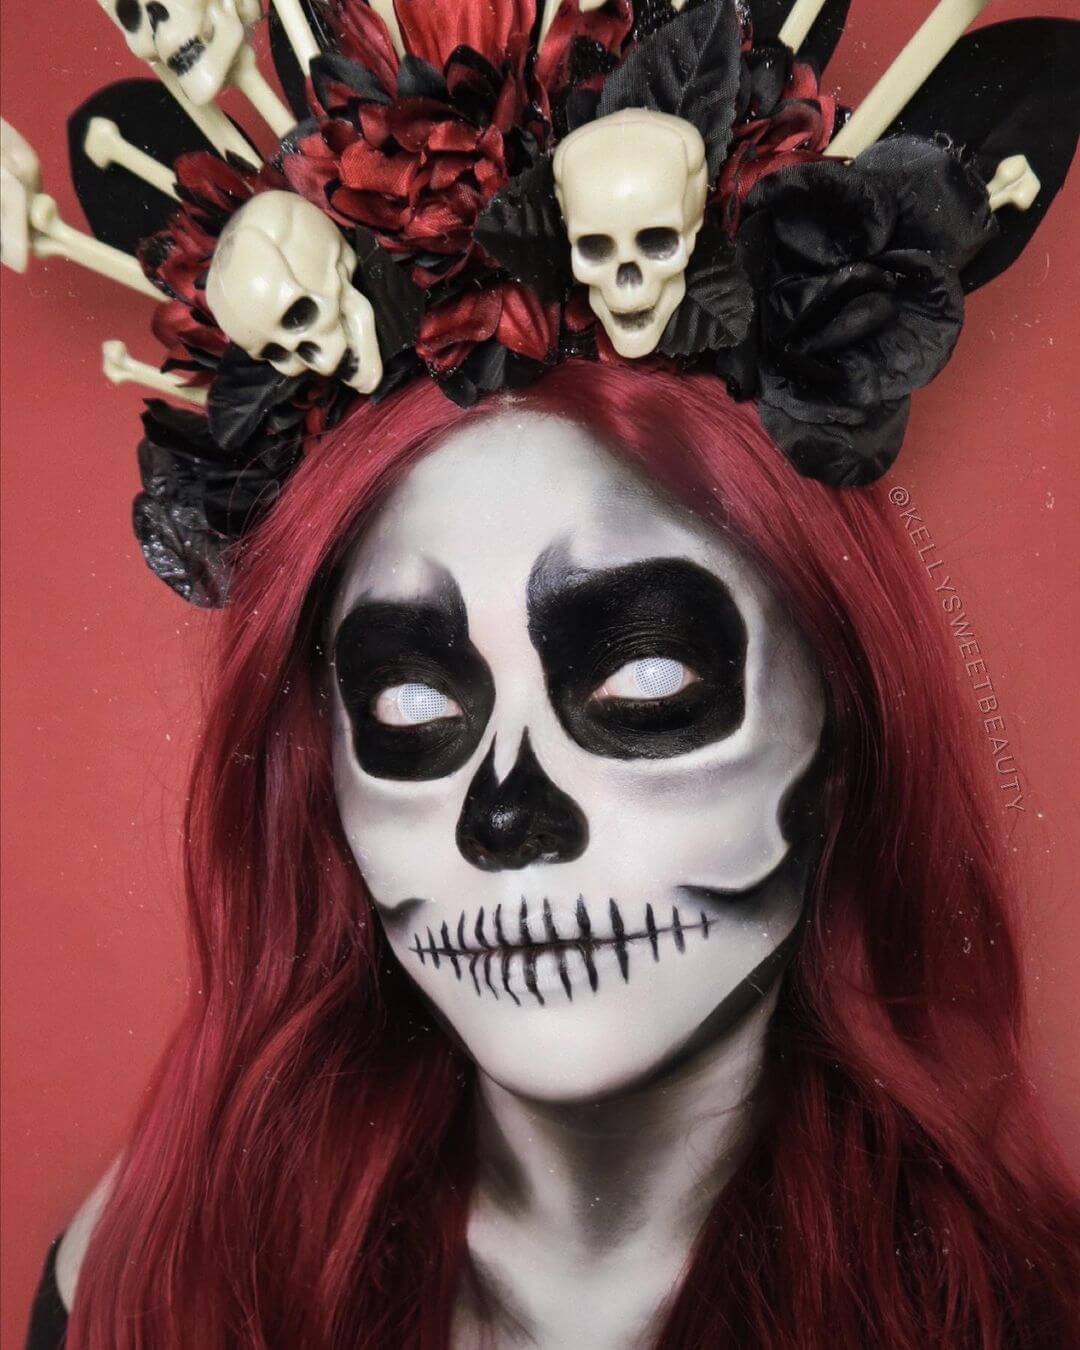 The floral skull-crowned queen everyone needed this year!